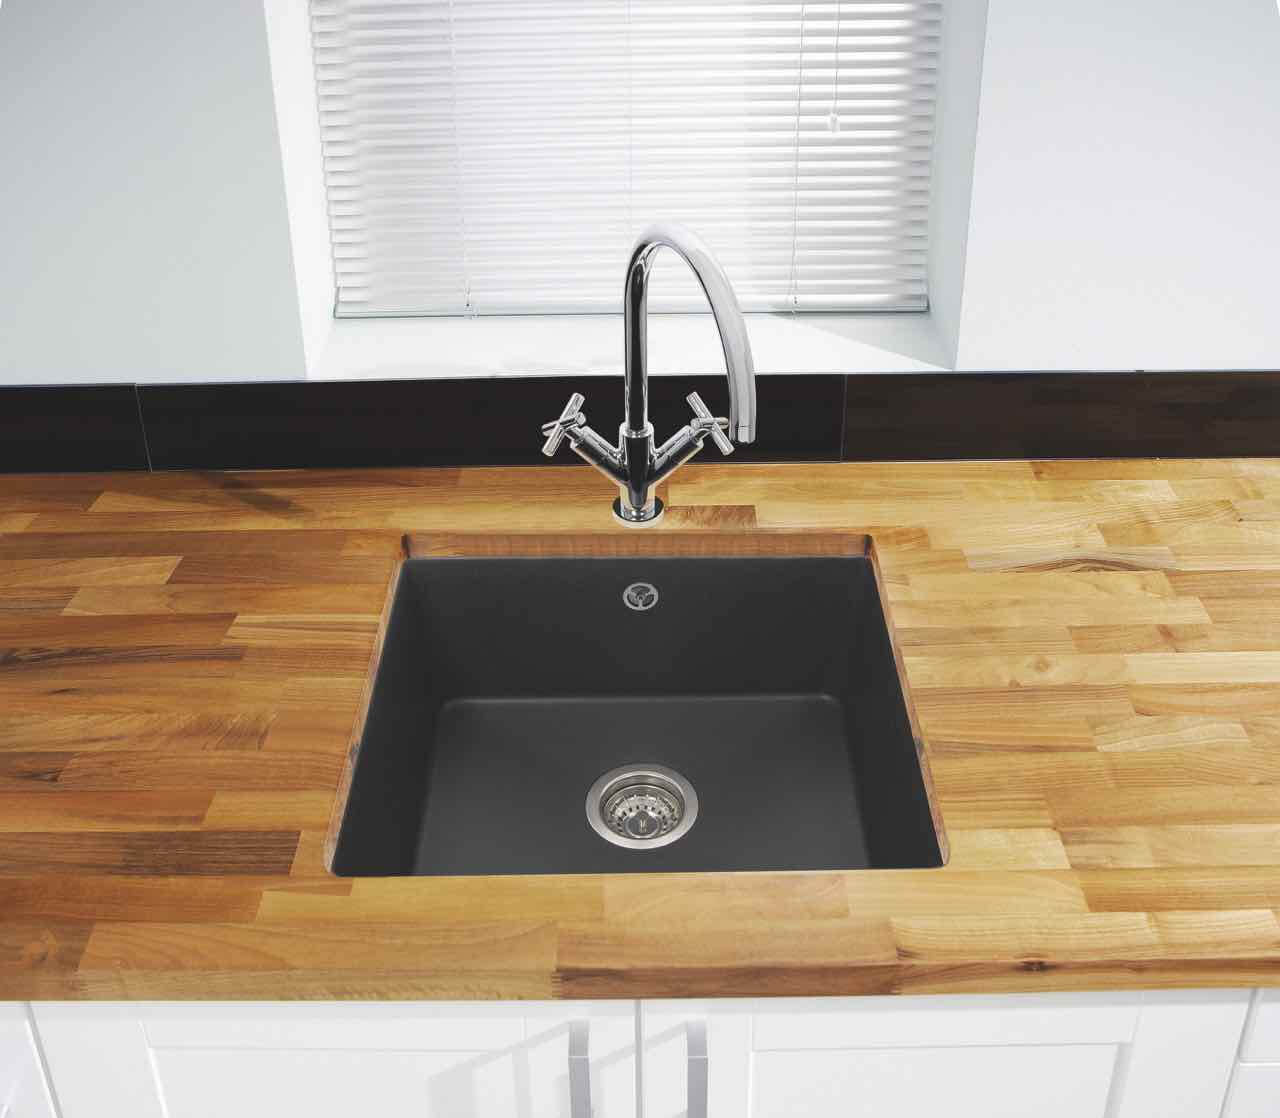 Caple has added two new granite sink collections to its portfolio